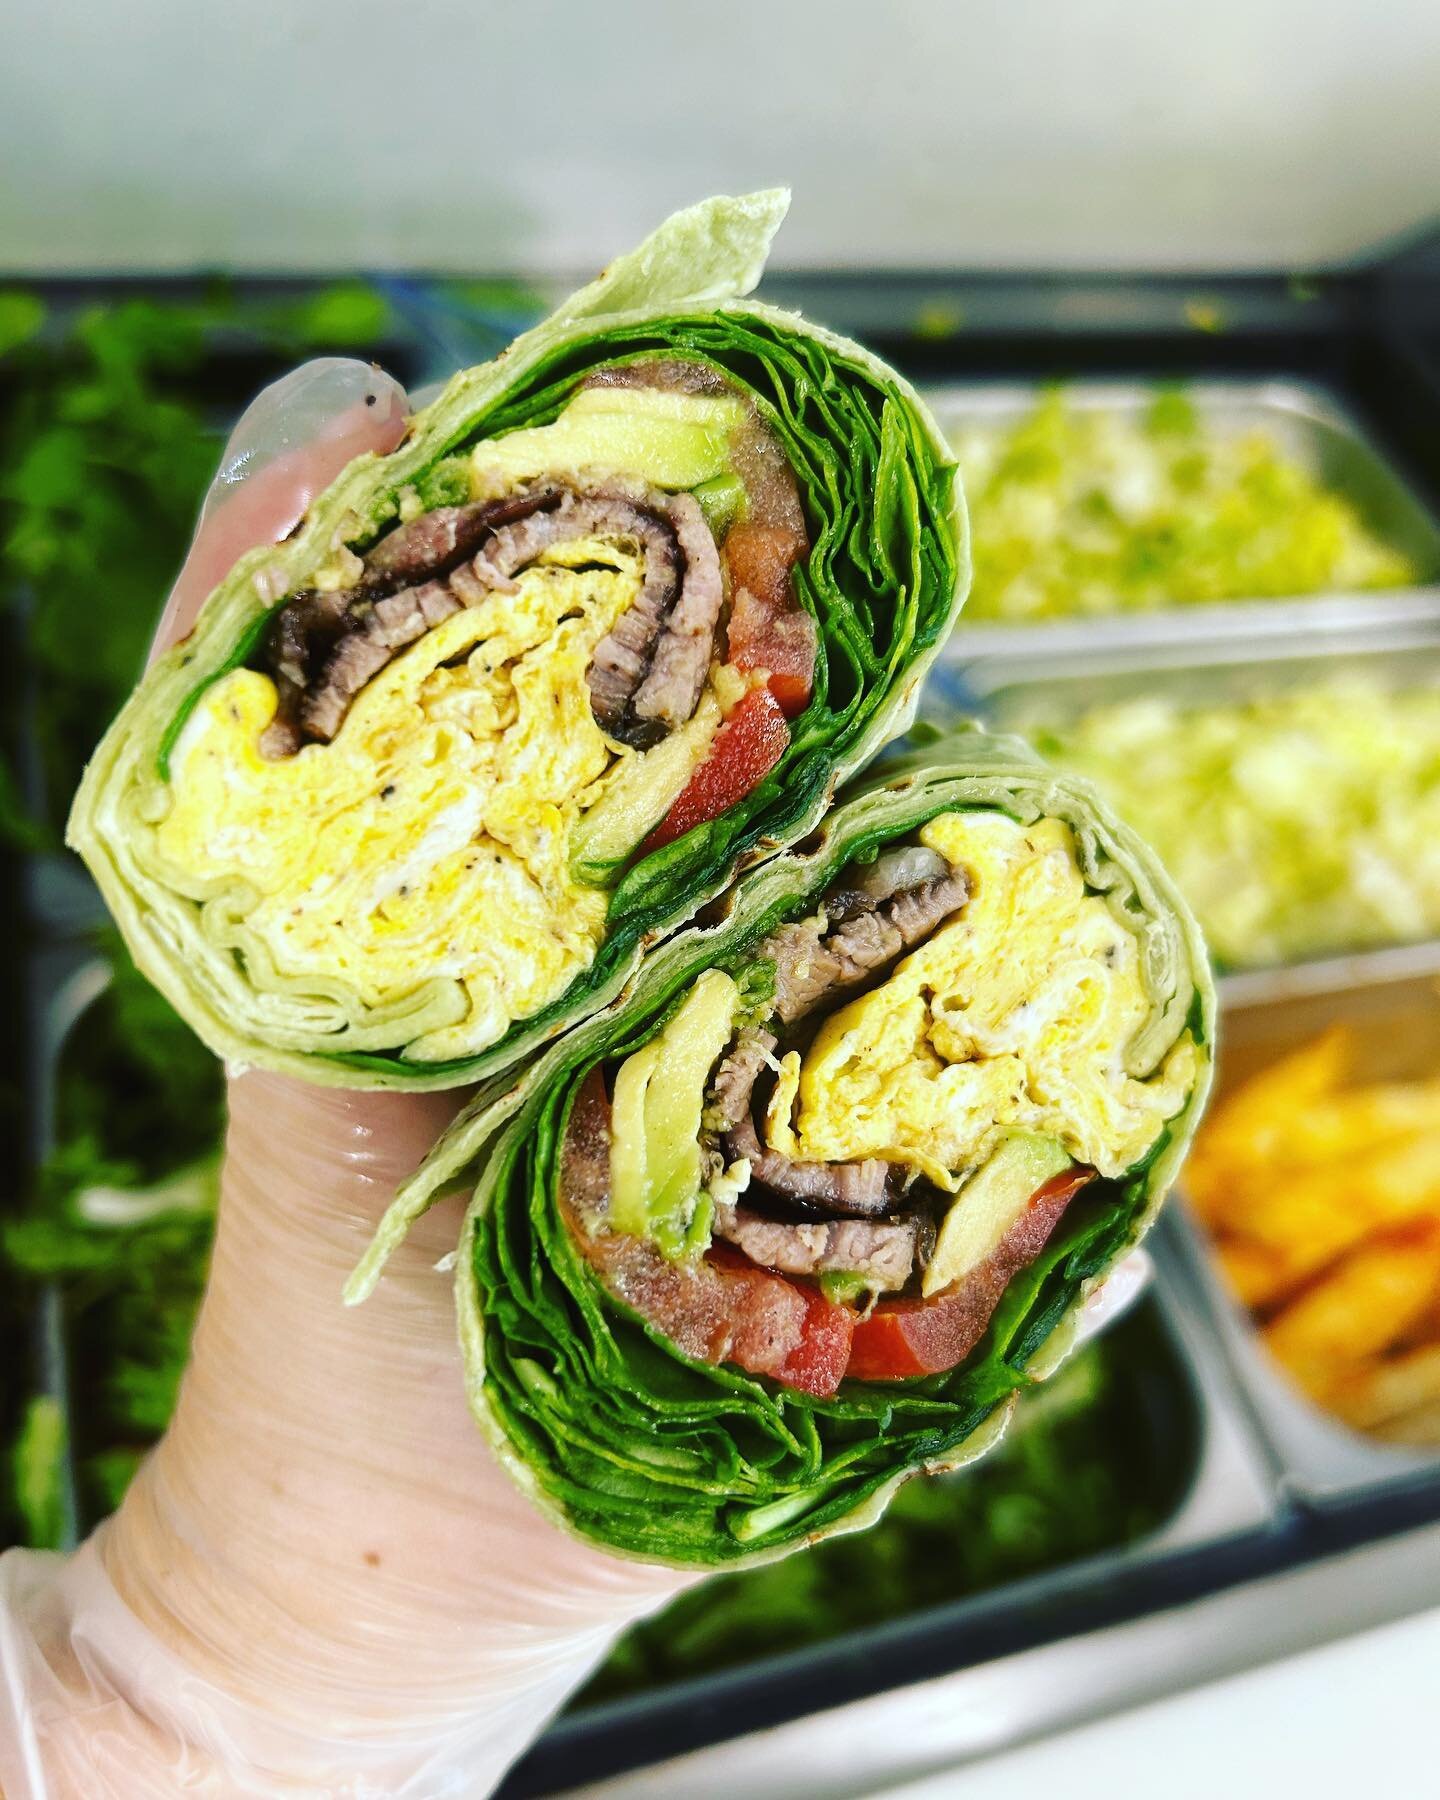 Good Morning! Treat yourself to a protein packed Breakfast Wrap with Tri Tip to fuel you through the day!💪 #realfoodfoodclub #proteinforbreakfast